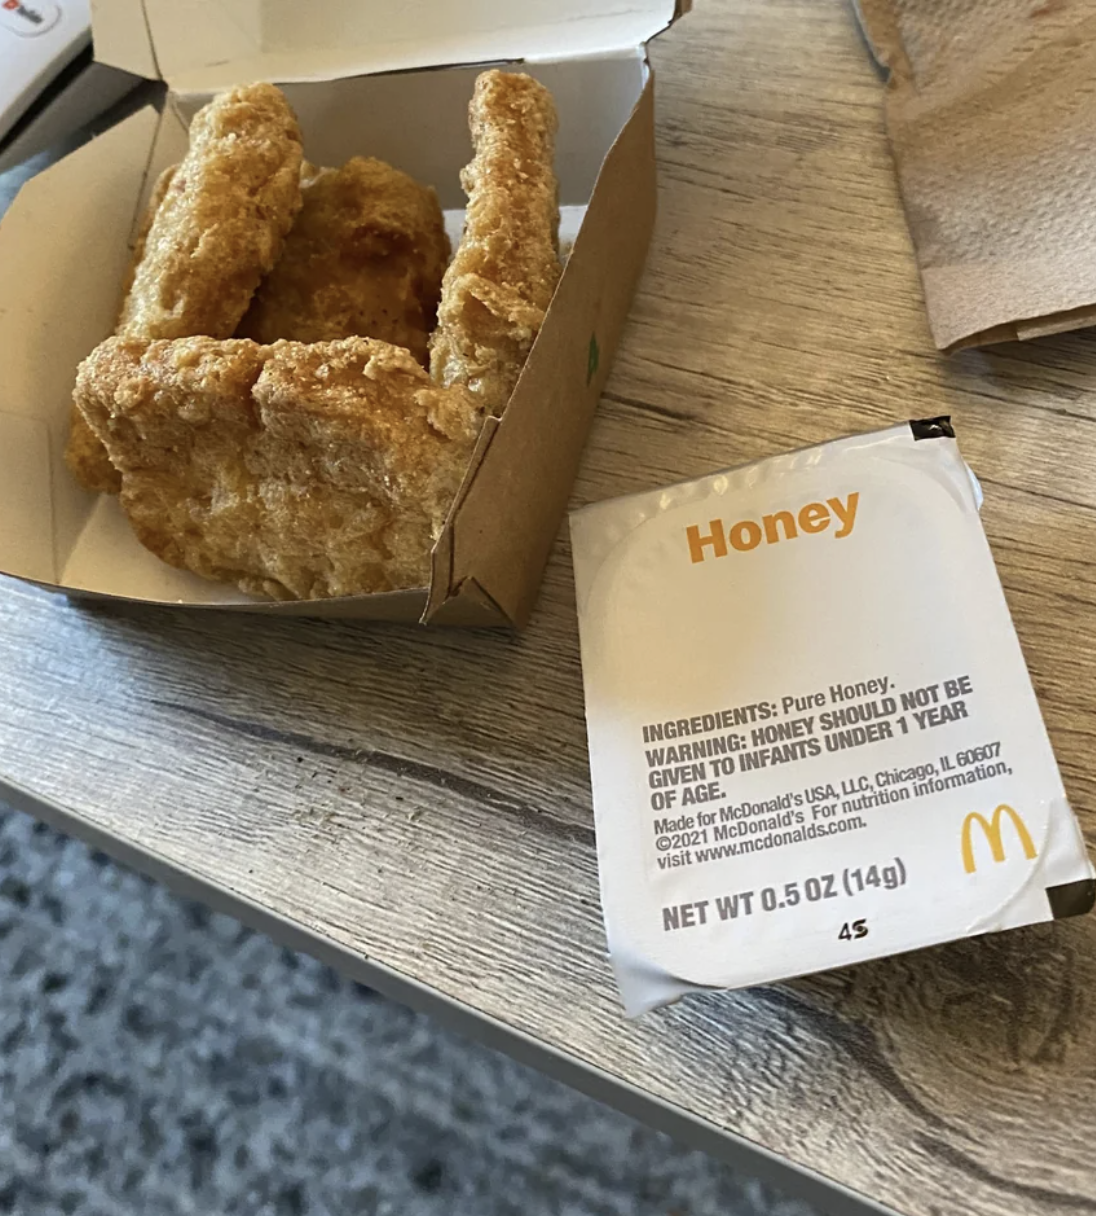 Fried chicken with a side of honey.